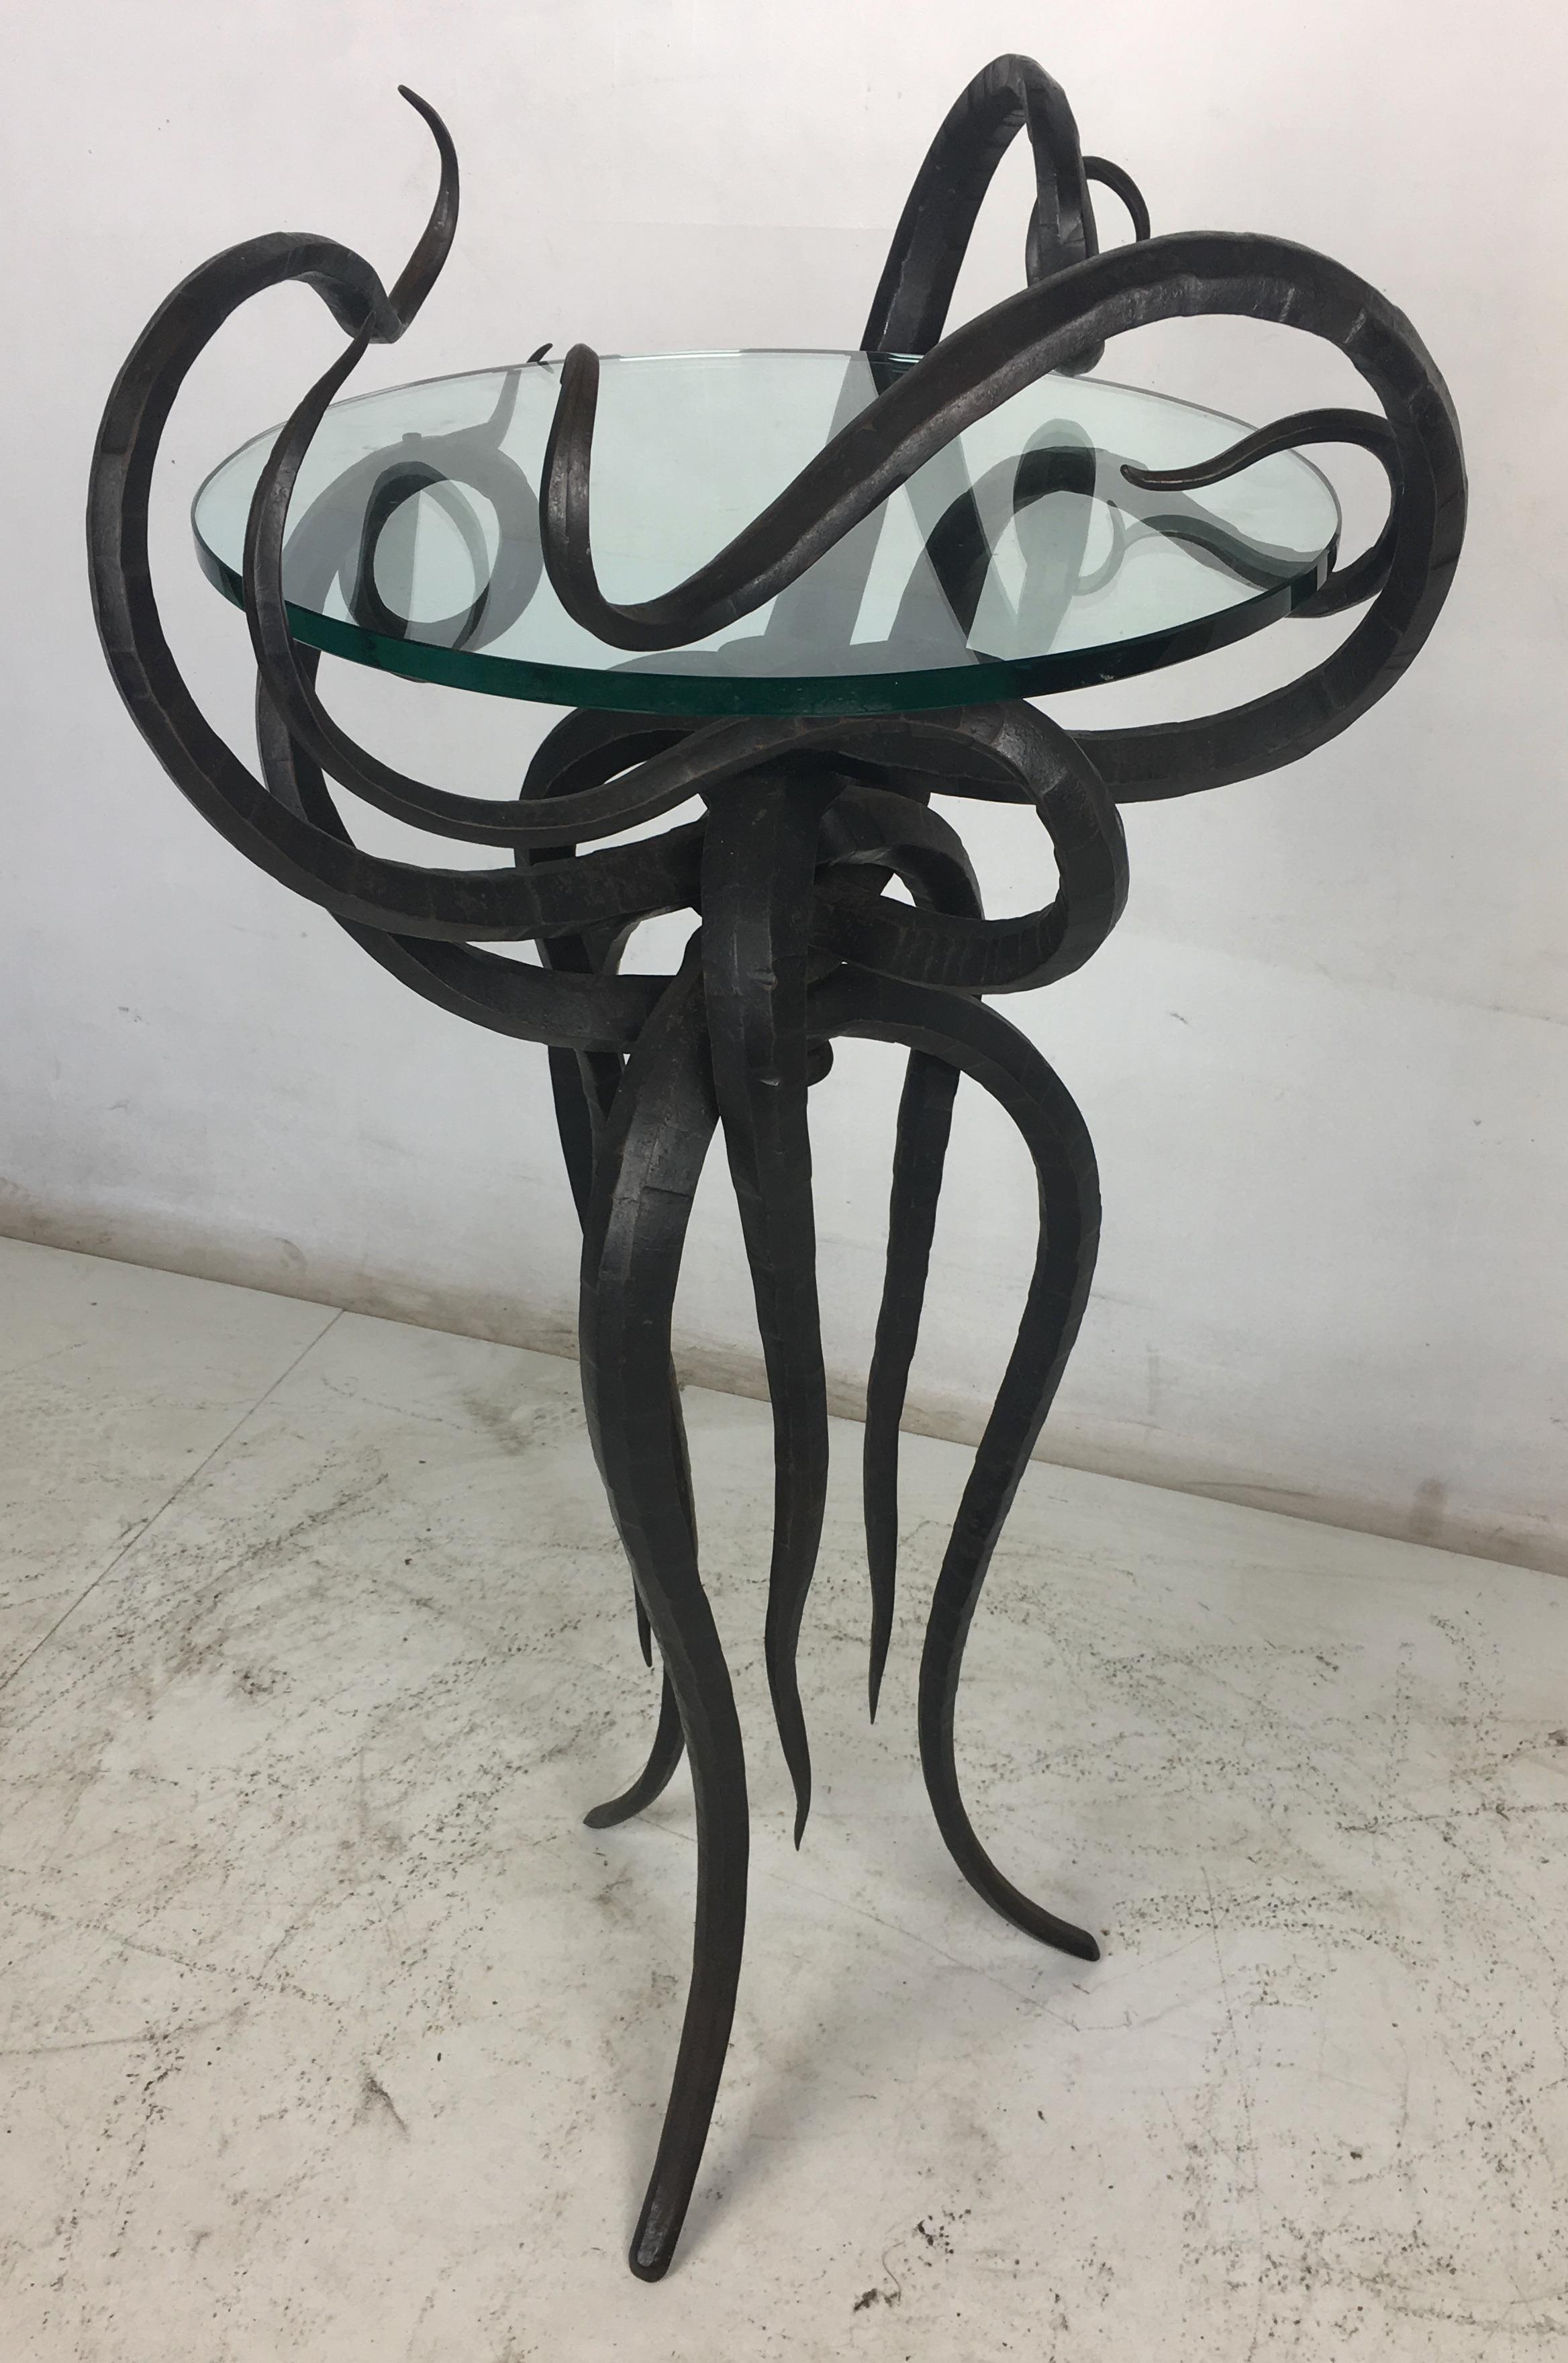 An incredible Artisan wrought iron tour de force is this sculptural side table or plant stand. The twelve tendrils cradle a glass top in its center as it stands on its flowing legs. The workmanship and design on this table is top quality in every